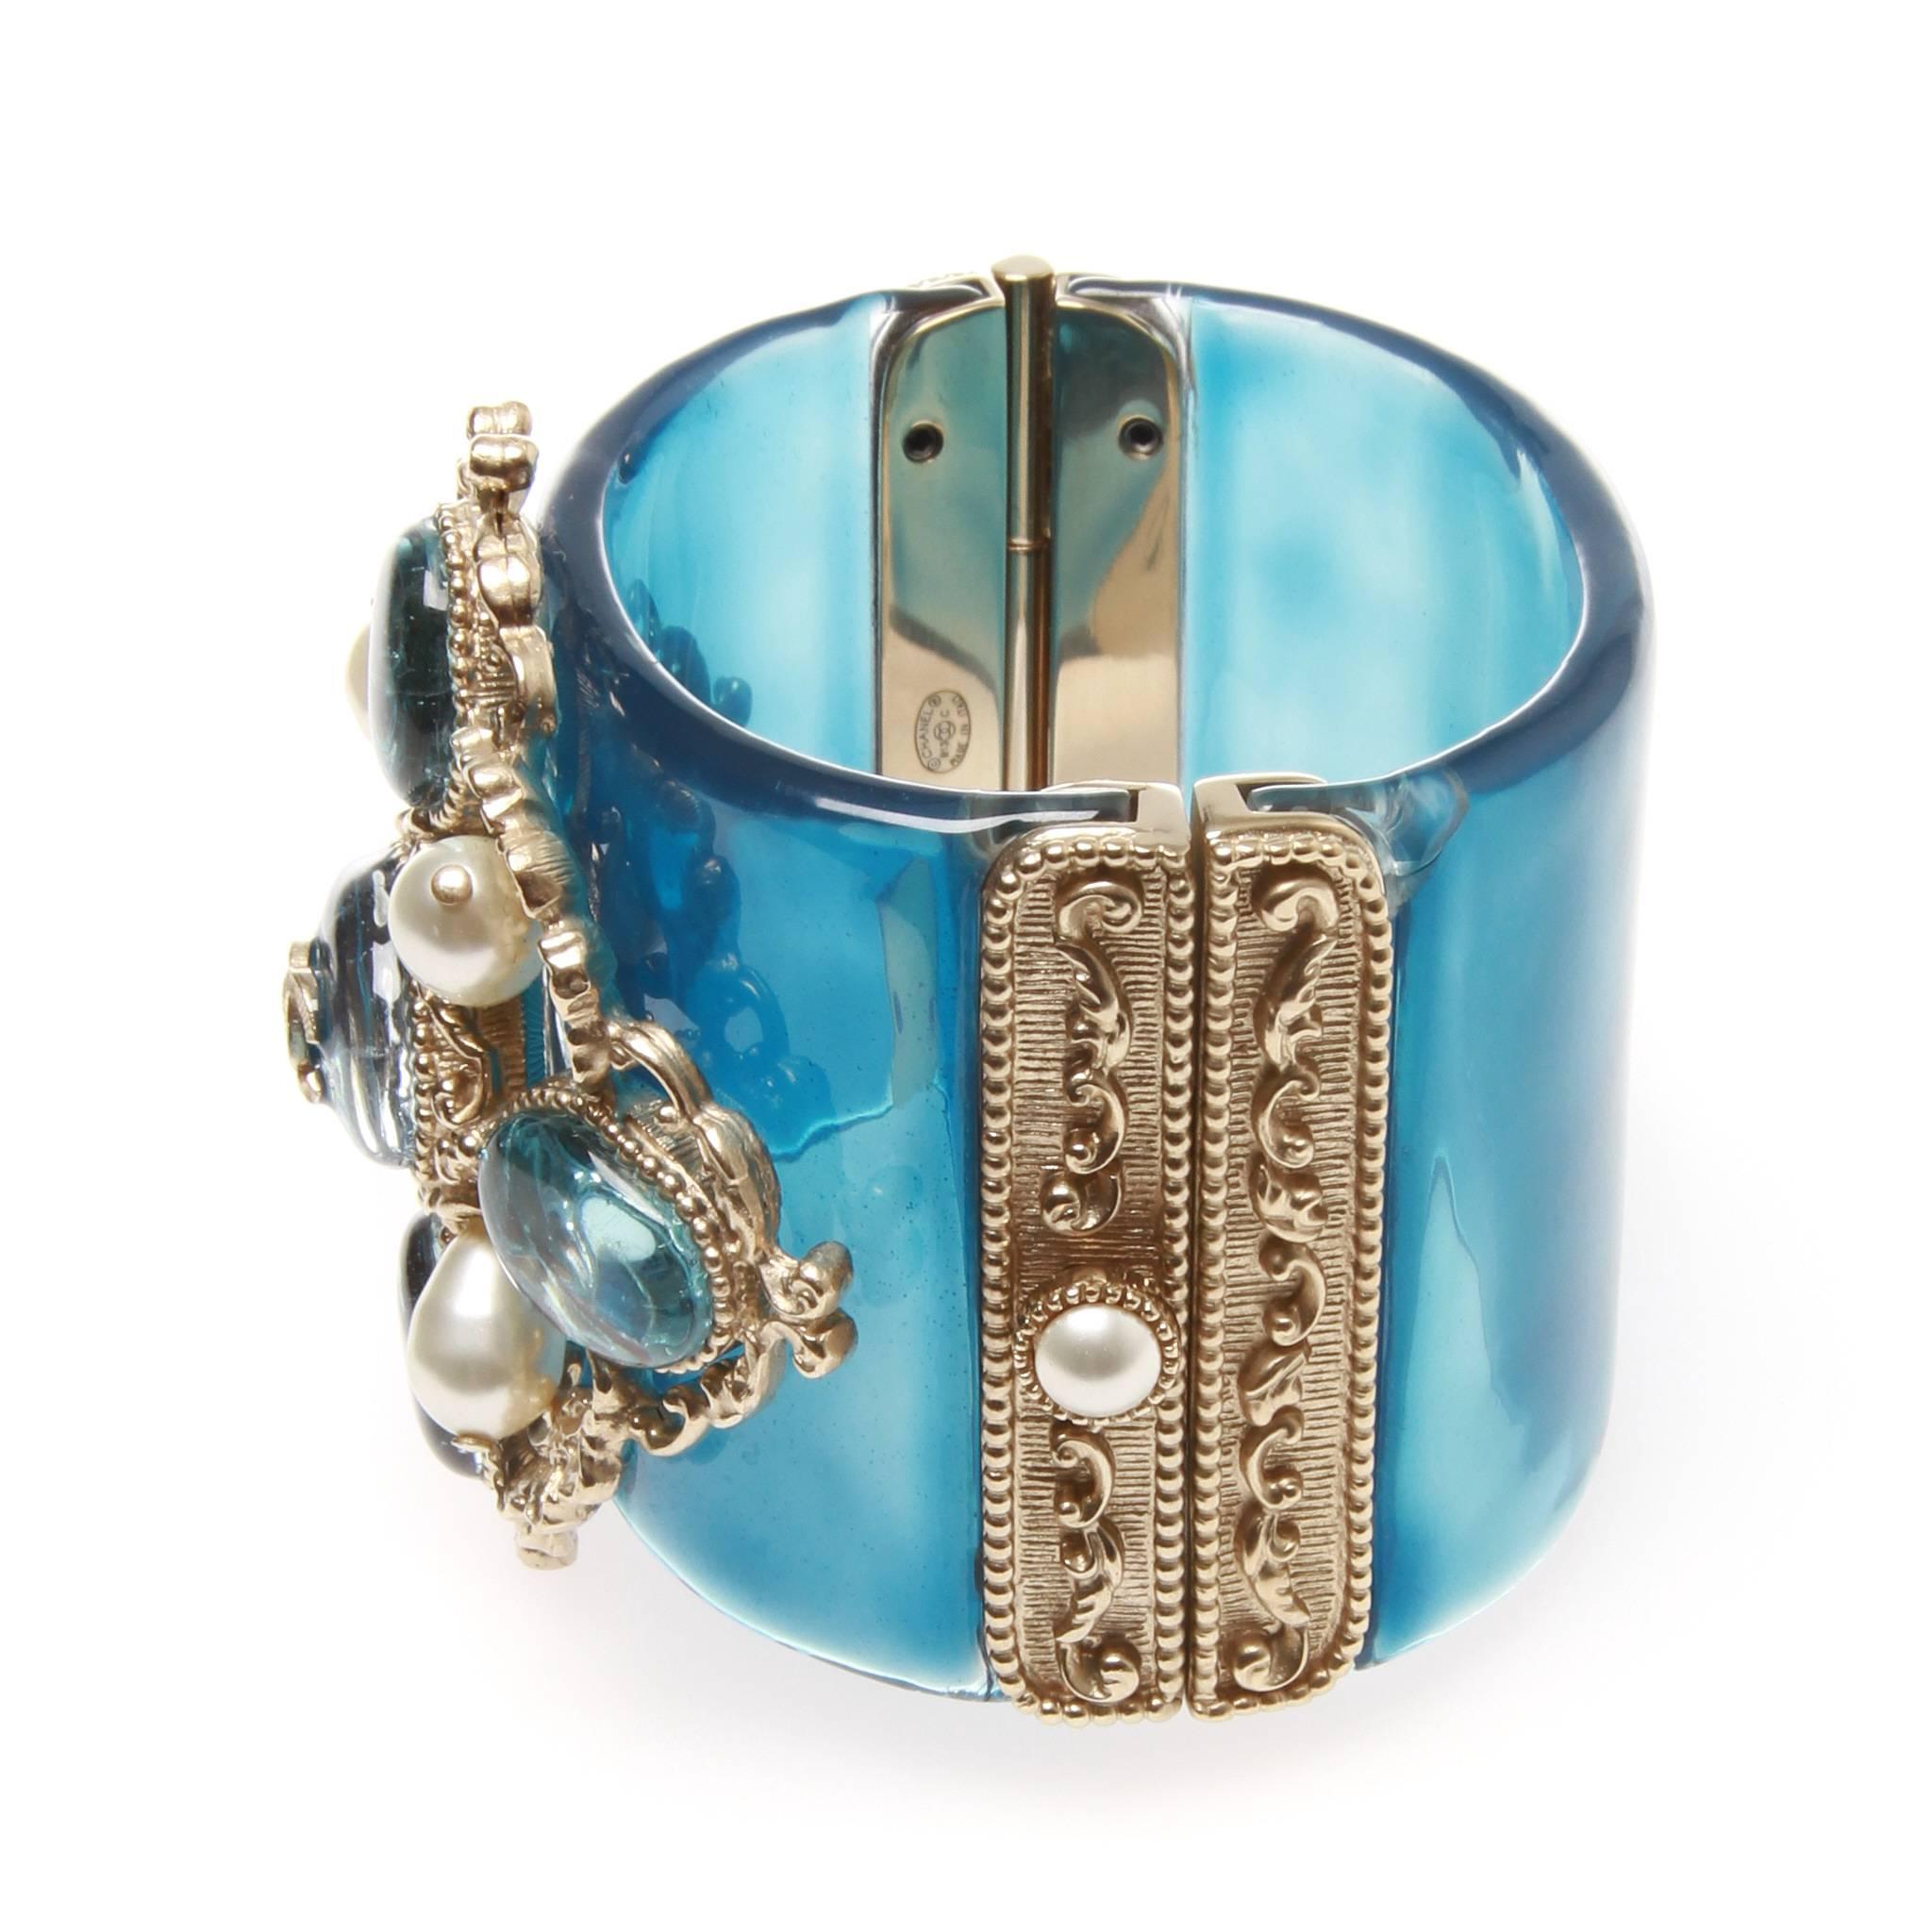 Chanel Cruise 2013 "Versailles" blue resin cuff with Gripoix jewels and pearls. Rare and coveted piece from an iconic cruise collection. Crafted of blue resin and silver filigree featuring a poured glass and pearl adornment around an